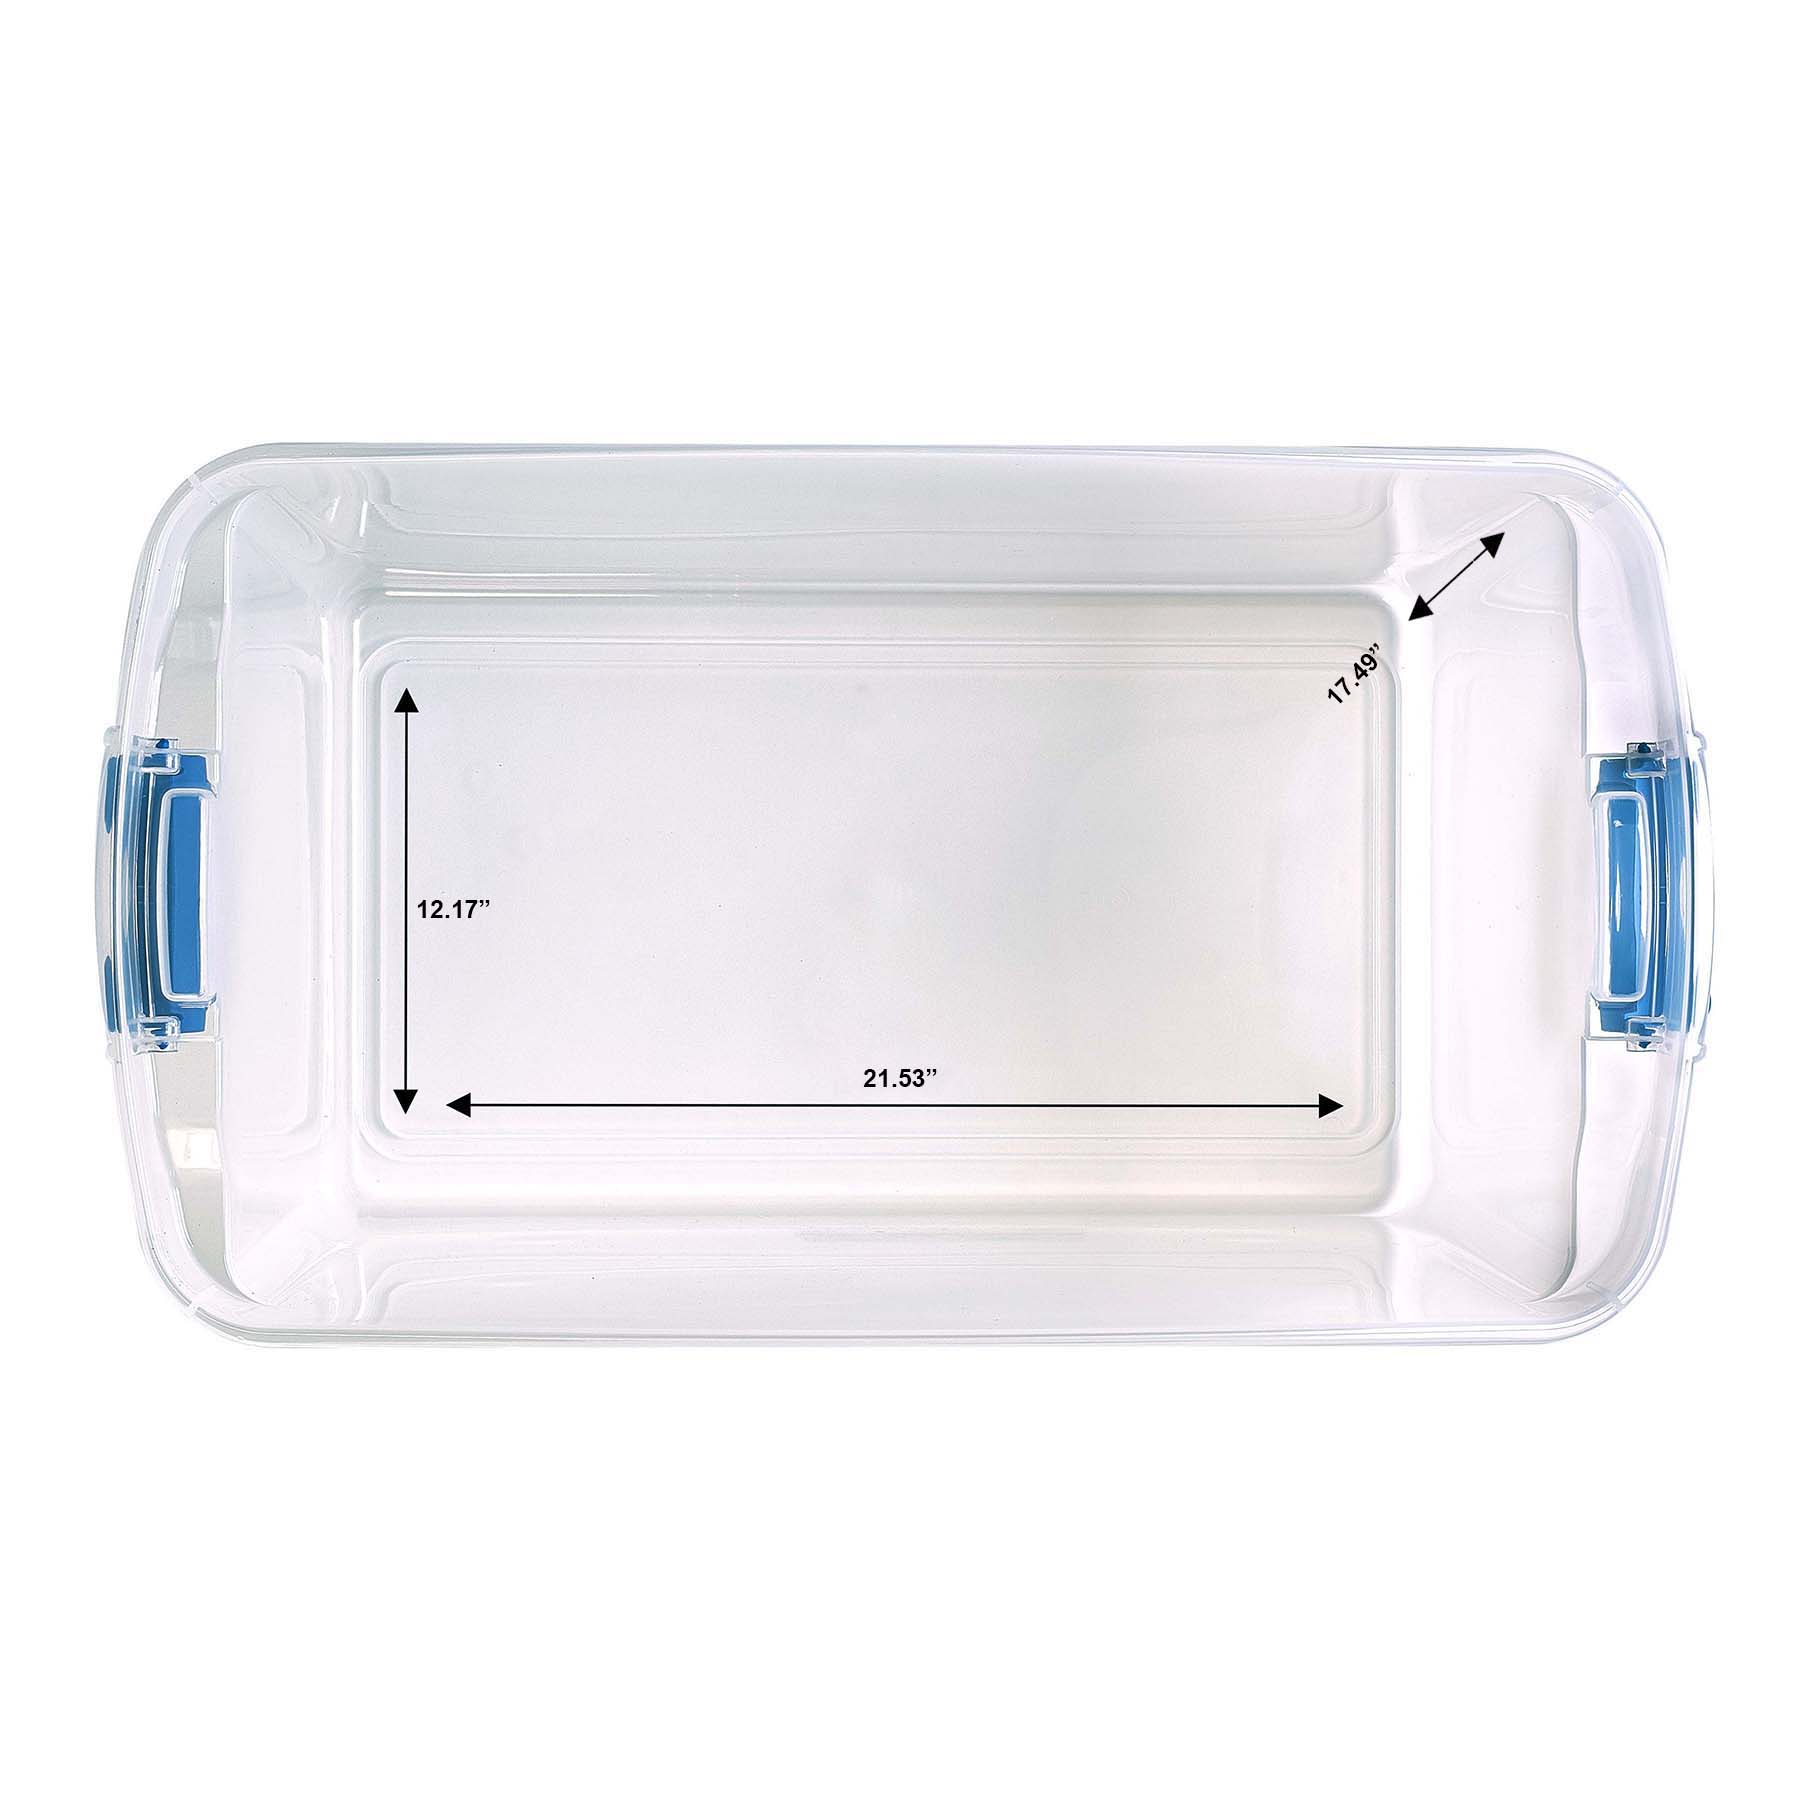 Homz 28 Gallon Stackable Latching Plastic Storage Boxes, Blue and Clear, 6 Count - image 4 of 7